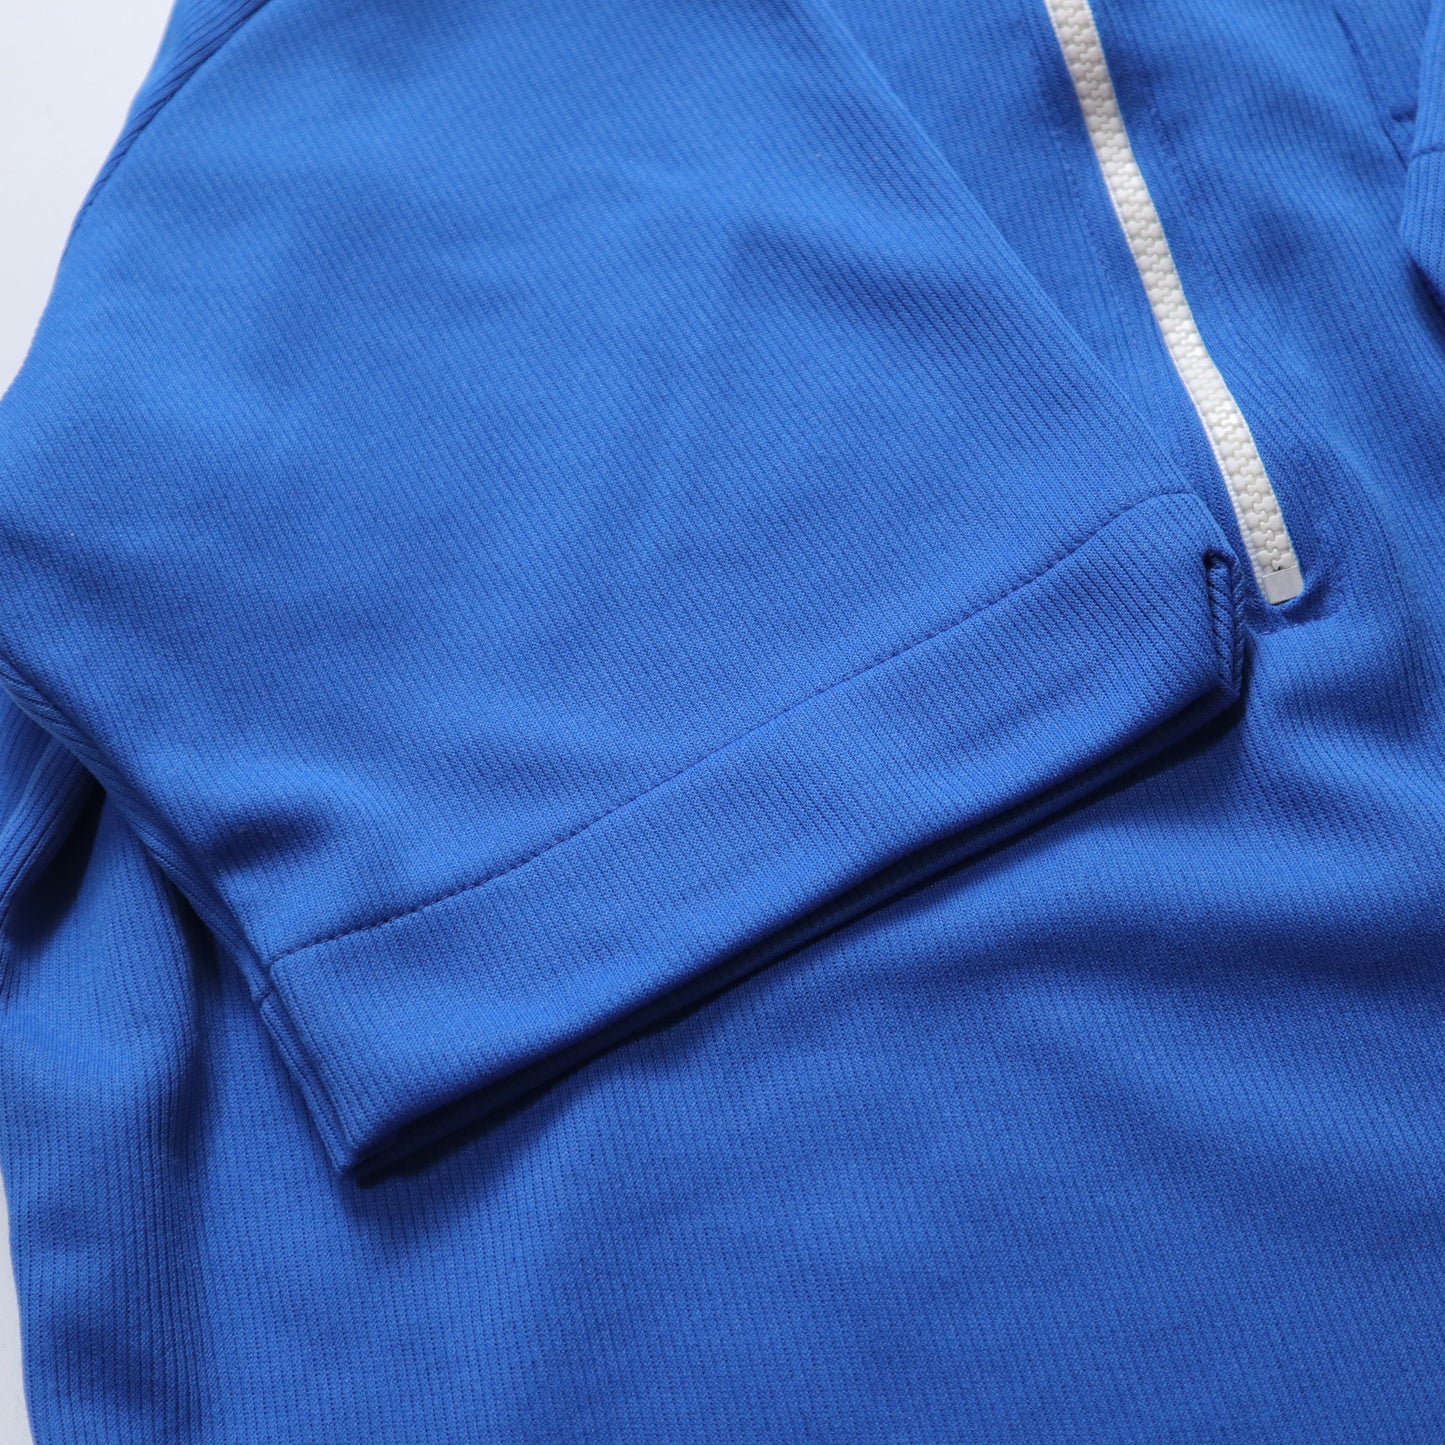 1970s Hilton royal blue zip-up bowling shirt made in the USA